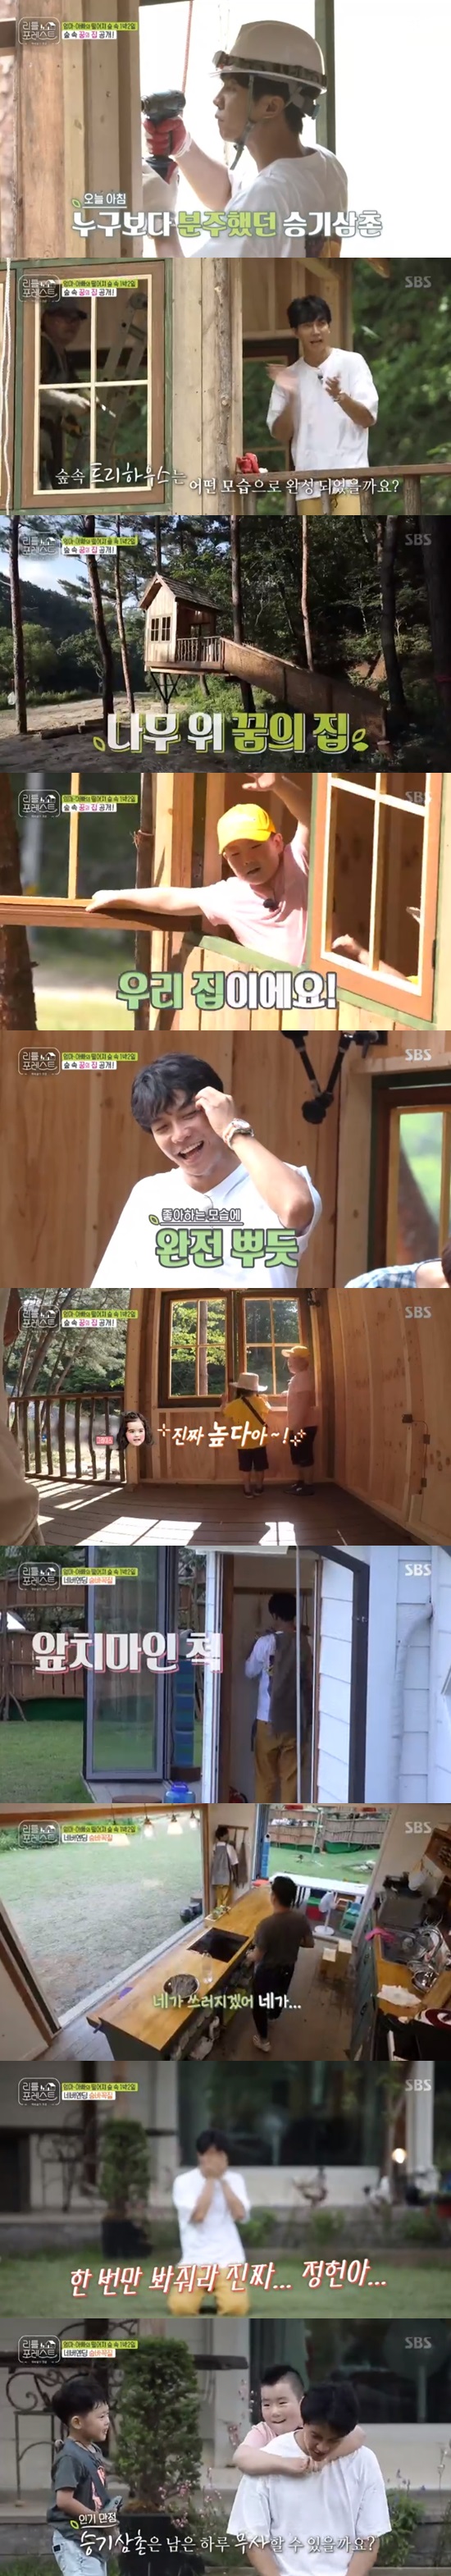 Lee Seung-gi made The Shack from morning and was discharged from the Hide and Seek.The second meeting began on SBS Little Forest, which aired on August 26th.Lee Seo-jin Lee Seung-gi Park Na-rae Jung So-min met again with seven Brook (5) Grace (5) Mai Hyun (4) Choi Yu-jin (4) Little Lee.This time, this contribution (6) is new and will take care of six children.Lee Seung-gi was sweating to complete the forest The Shack treehouse, which she had envisioned a month before the children arrived; Lee Seo-jin also joined in.Then, as the children began to arrive one by one, Lee Seung-gi welcomed the children and laughed at them repeatedly asking, Did you want to see The Uncle?My mother and Choi Yu-jin each had testimonies of their mothers who missed Little Forest and The Uncle aunts at home, but the children who arrived were chic, and Lee Seung-gi repeatedly asked, Who especially wanted to see?The childrens lunch menu was Arancini and shrimp fries, and Lee Seung-gi said that it was hard to eat fried Arancini after carpentry work in the morning.Park Na-rae also suggested that there should be a separate adult menu, but Chef Lee Seo-jin said, Its not time. Dont think about it. Look at me.You eat anything and just finish it.So during the playtime after the meal, Lee Seung-gi took the children to find The Shack, and the children enjoyed Lee Seung-gi with a good time at The Shack.The problem is the endless physical strength of children.This contribution, which liked Hide and Seek even after going to The Shack, suggested Hide and Seek to Lee Seung-gi and Kang Lee-han, and Lee Seung-gi added sadness to the figure of being exhausted soon.Yoo Gyeong-sang